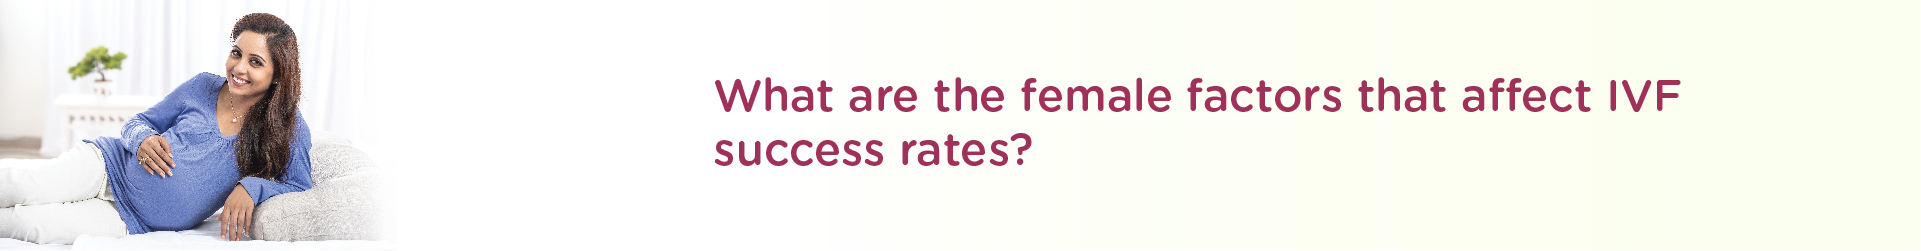 What are the Female Factors that Affect IVF Success Rates?